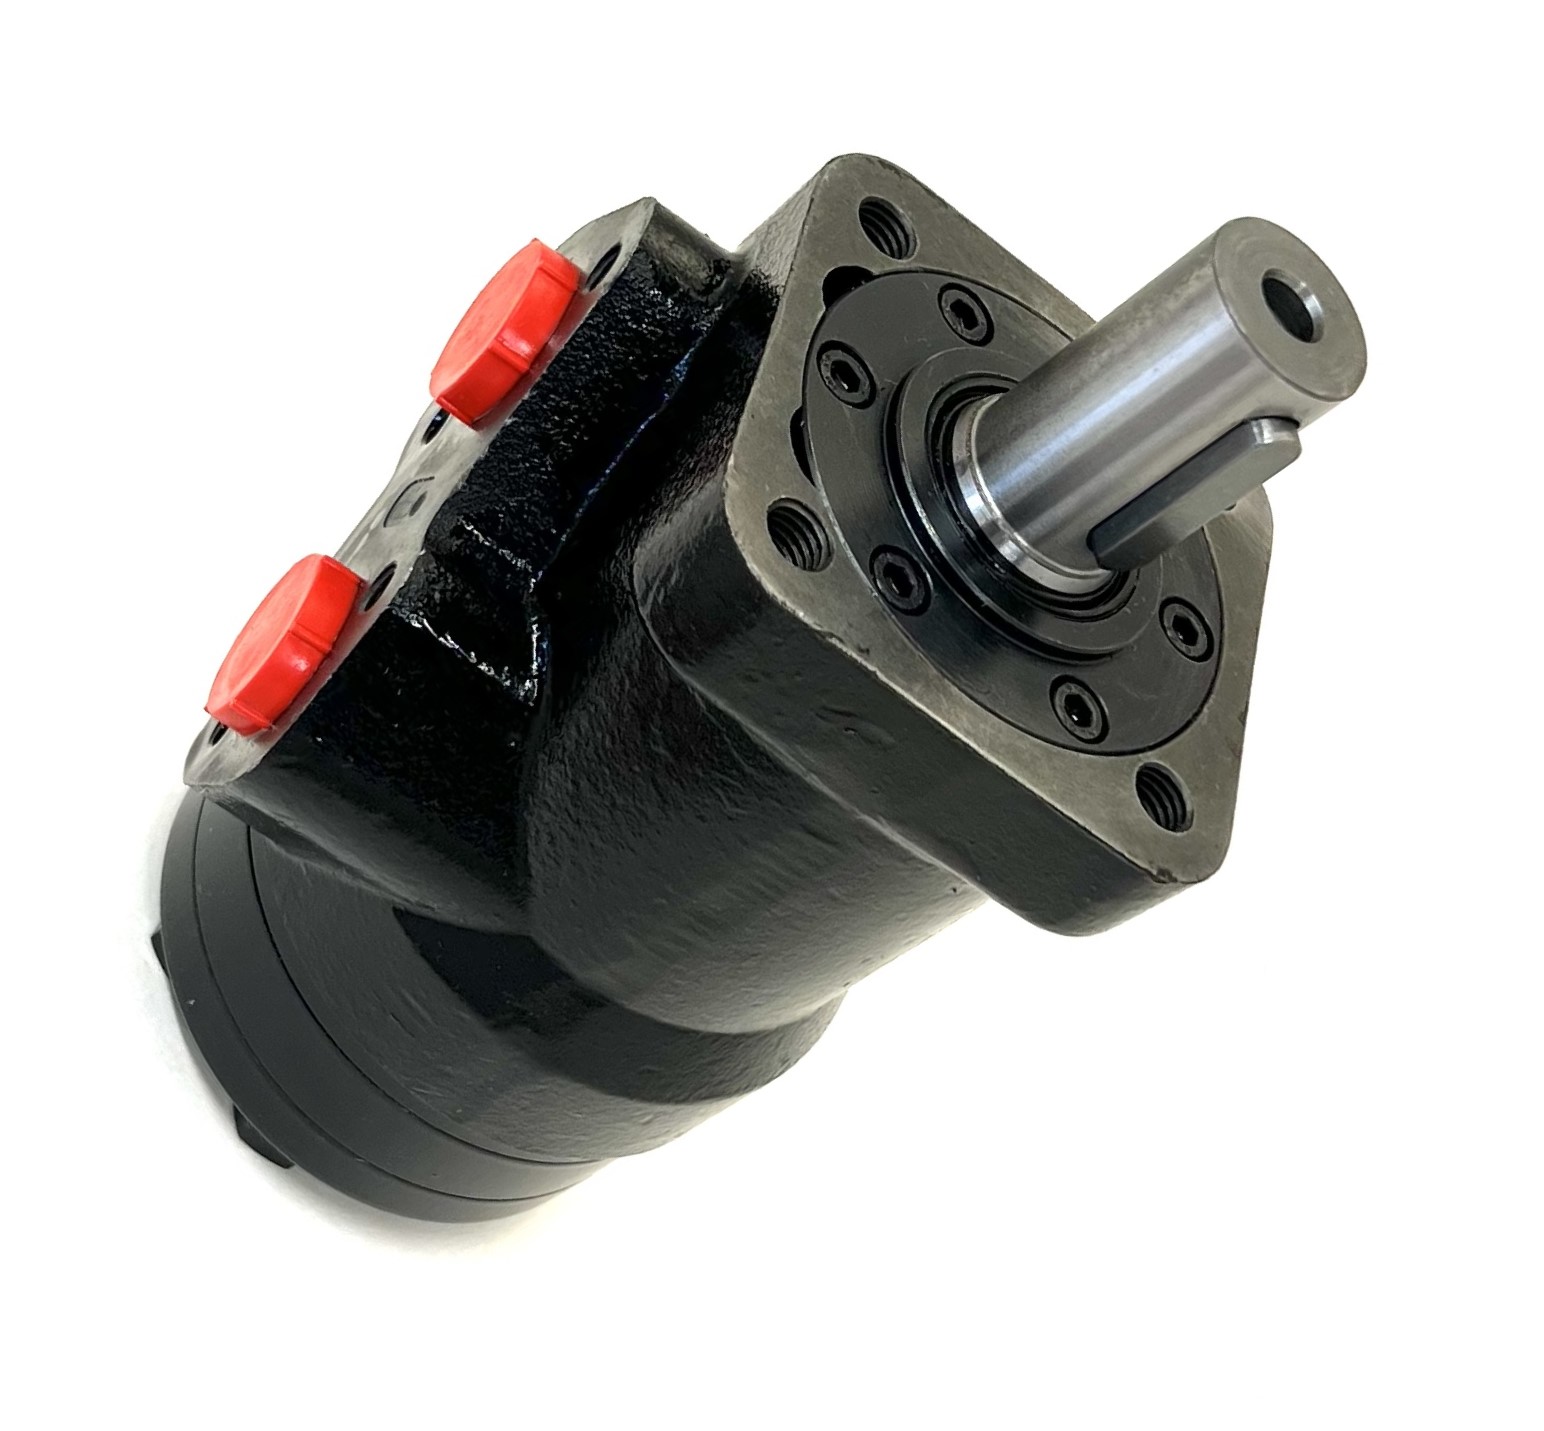 Flowfit Hydraulic Motor 51,2 cc/rev 25mm Parallel Keyed Shaft, 4 Hole Square Mount, High Pressure Seal